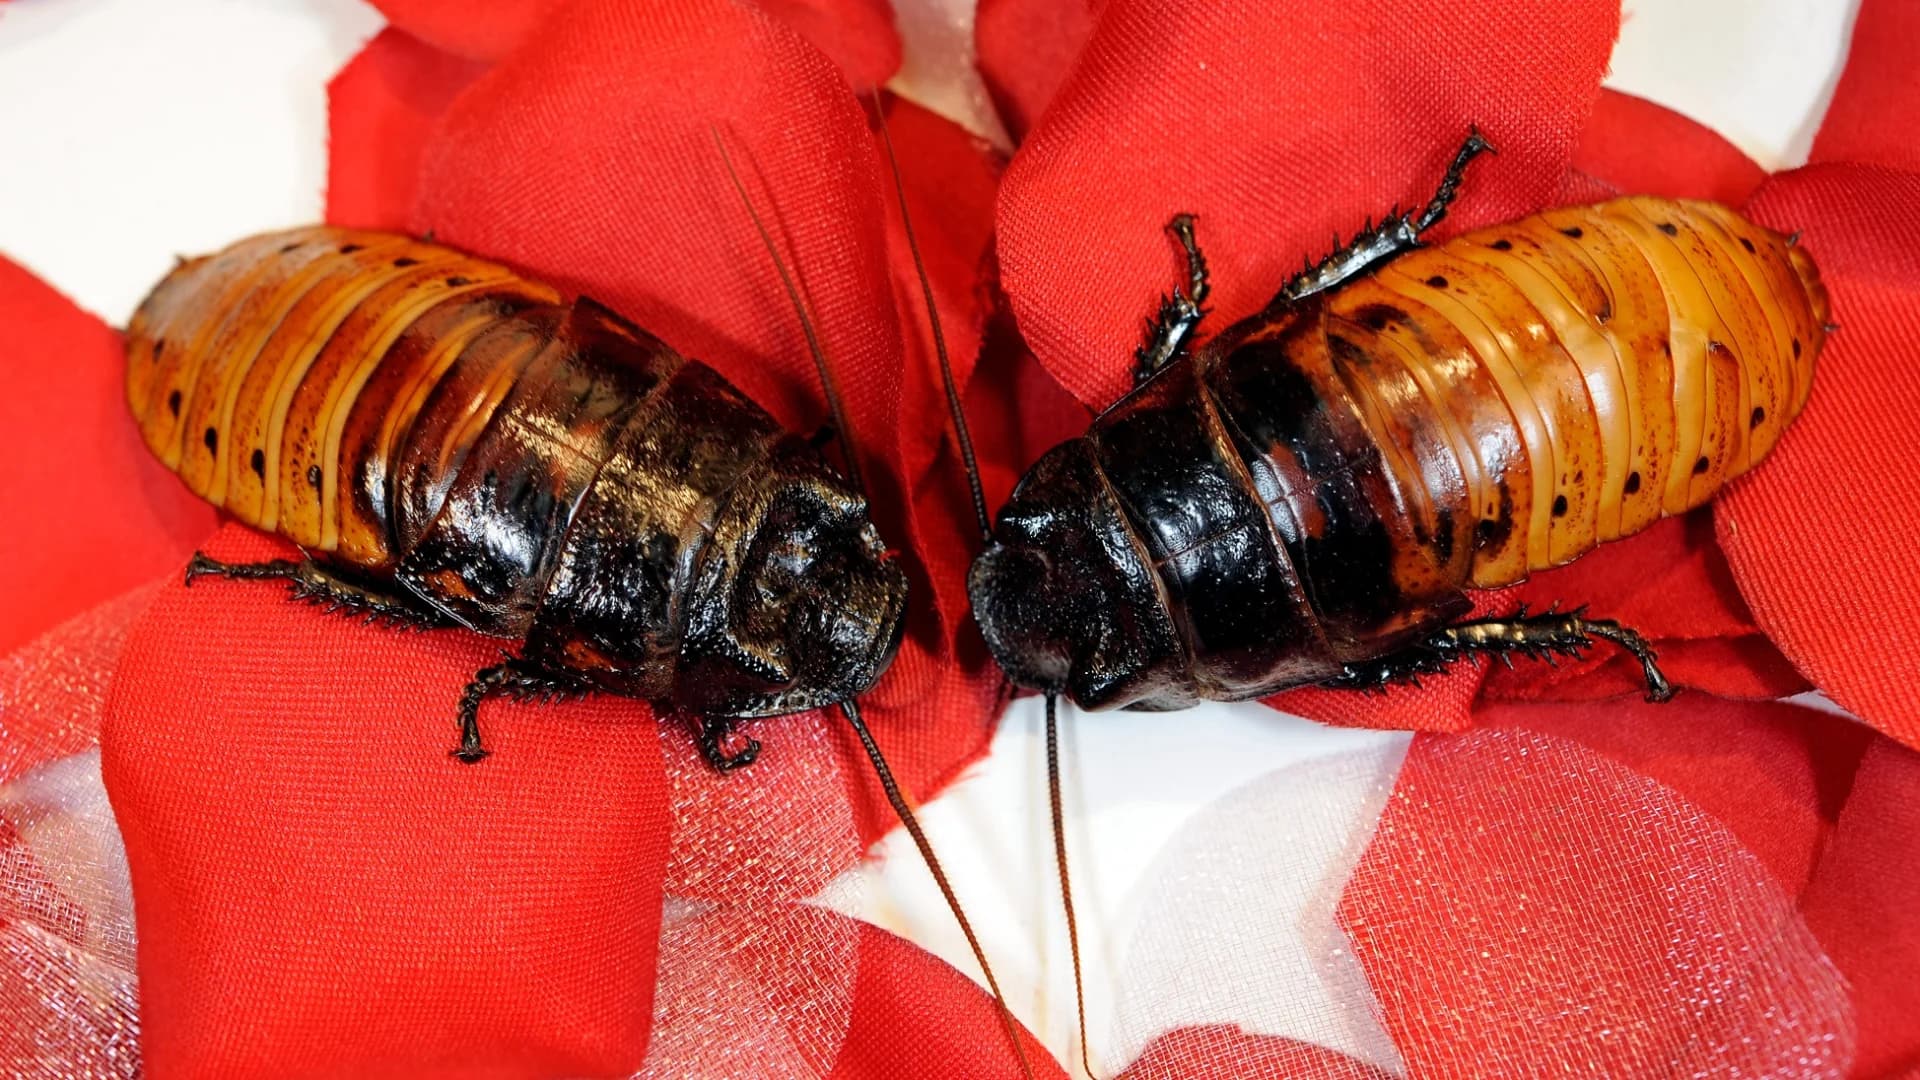 Name a Madagascar hissing cockroach at the Bronx Zoo for your valentine this year